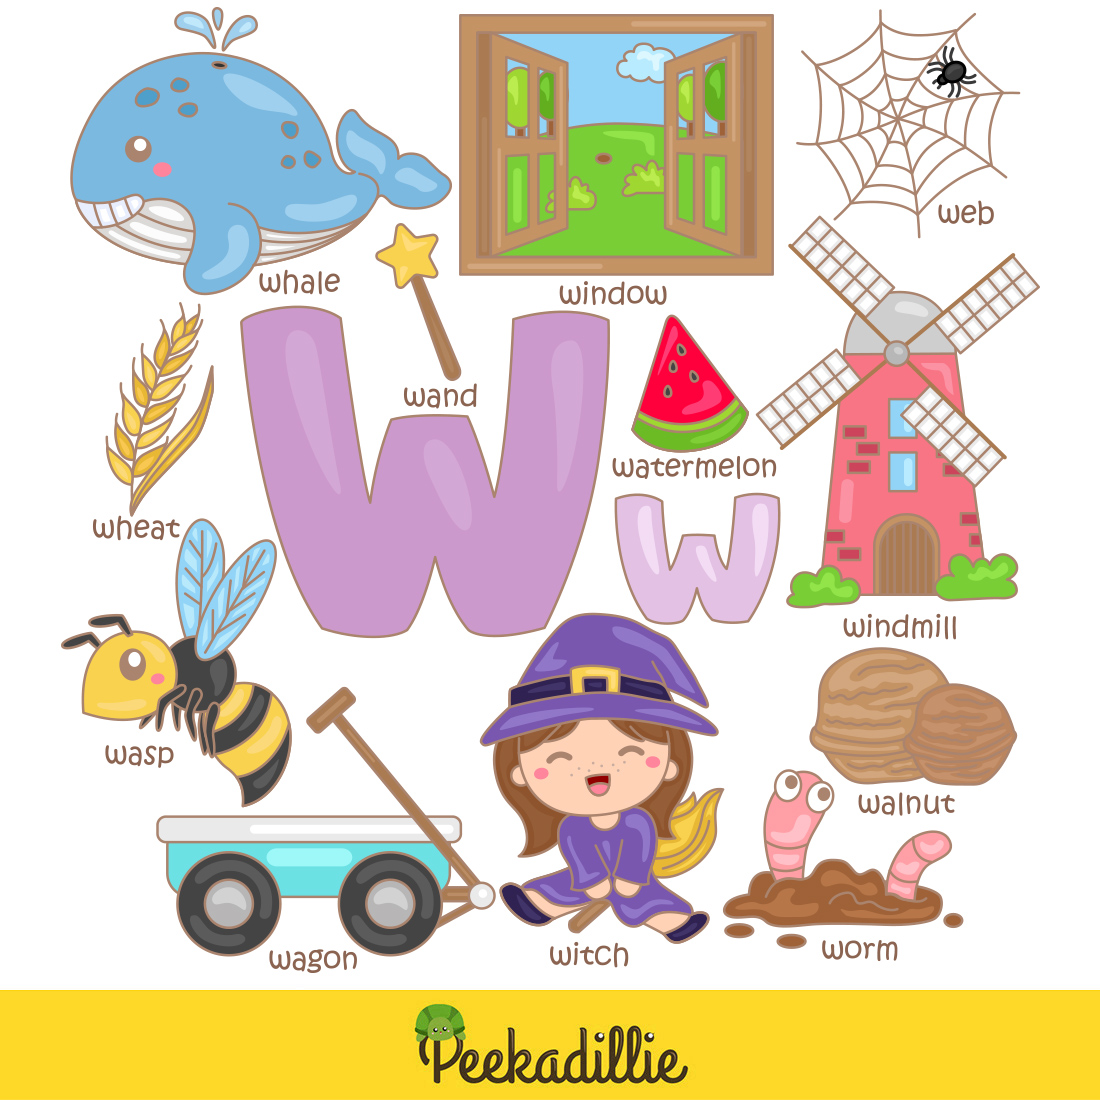 Alphabet W For Vocabulary School Letter Reading Writing Font Study Learning Student Toodler Kids Witch Wagon Web Worm Whale Watermelon Wheat Wand Window Windmill Walnut Wasp Cartoon Lesson Illustration Vector Clipart Sticker preview image.